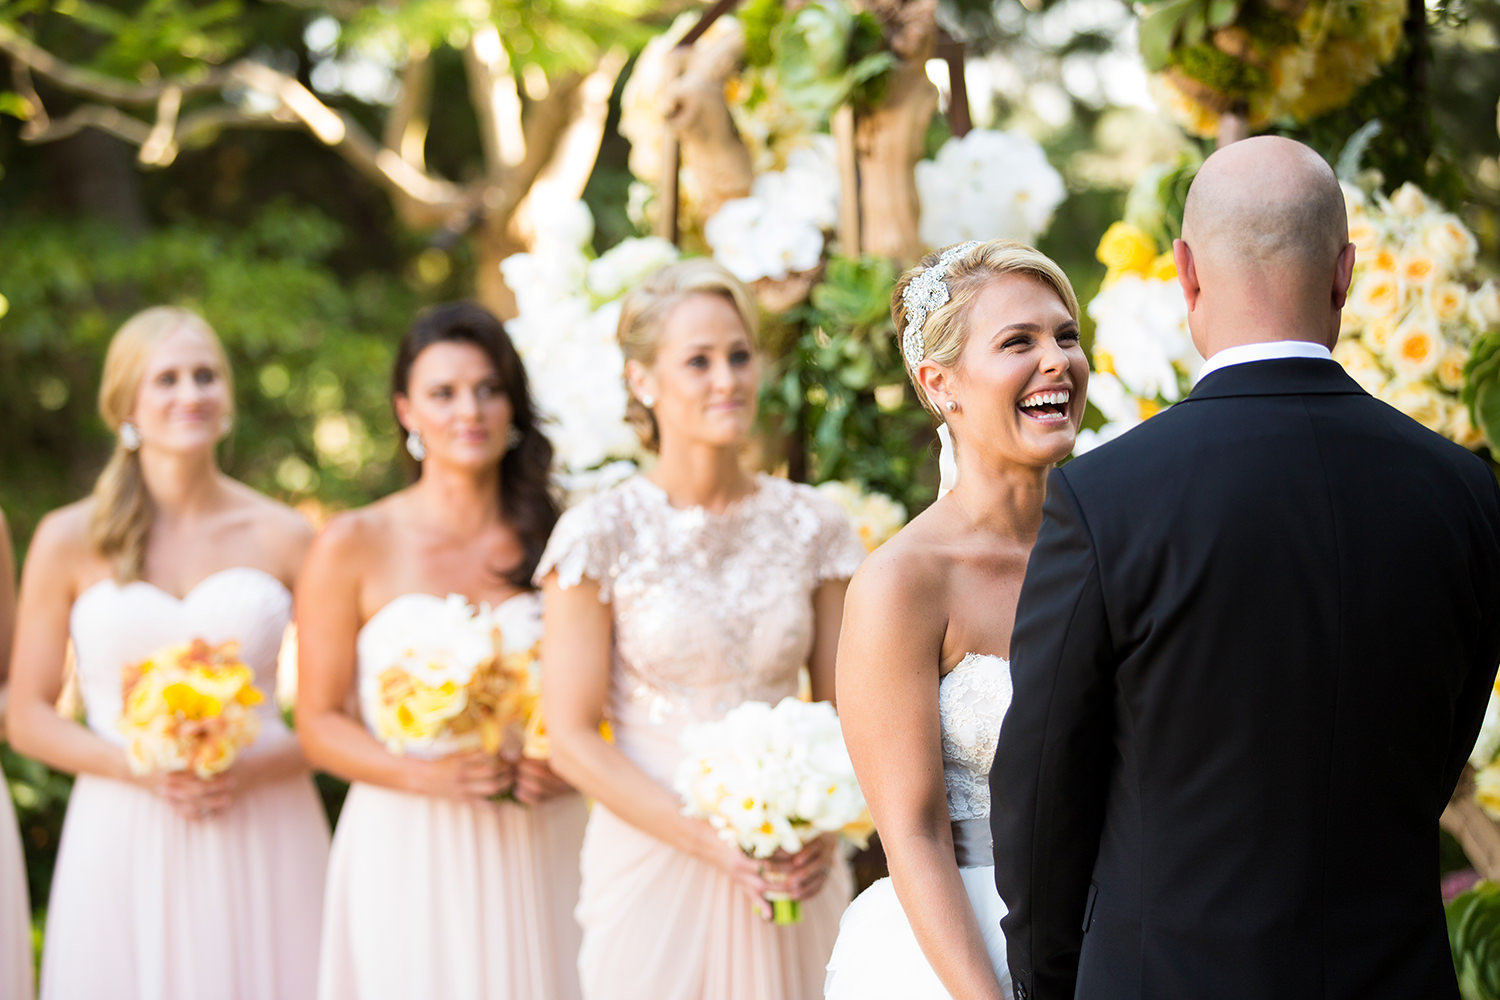 Laughter during the wedding vows is one of our favorite moments